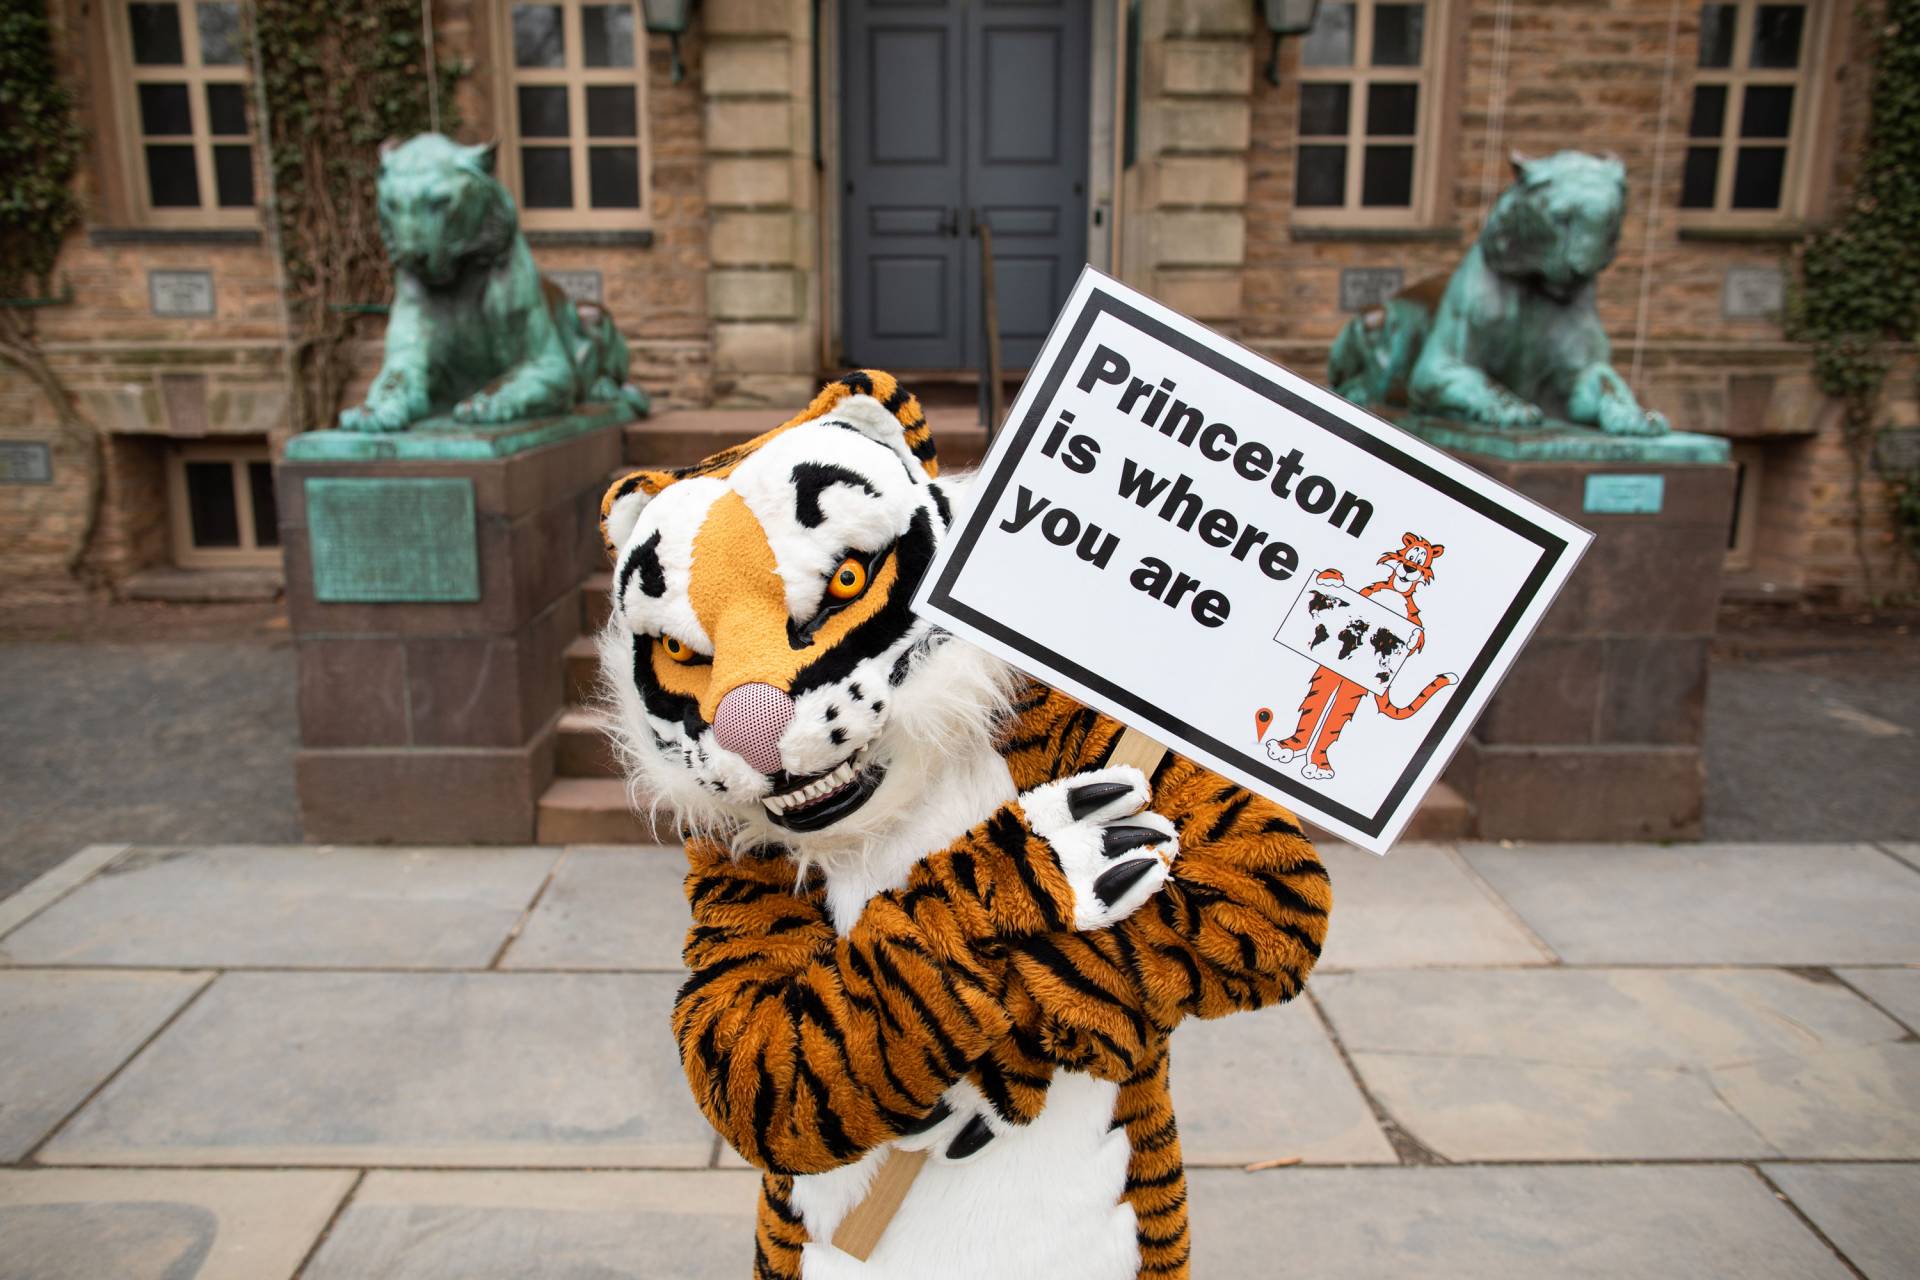 Tiger holding up a sign that reads, "Princeton is where you are."